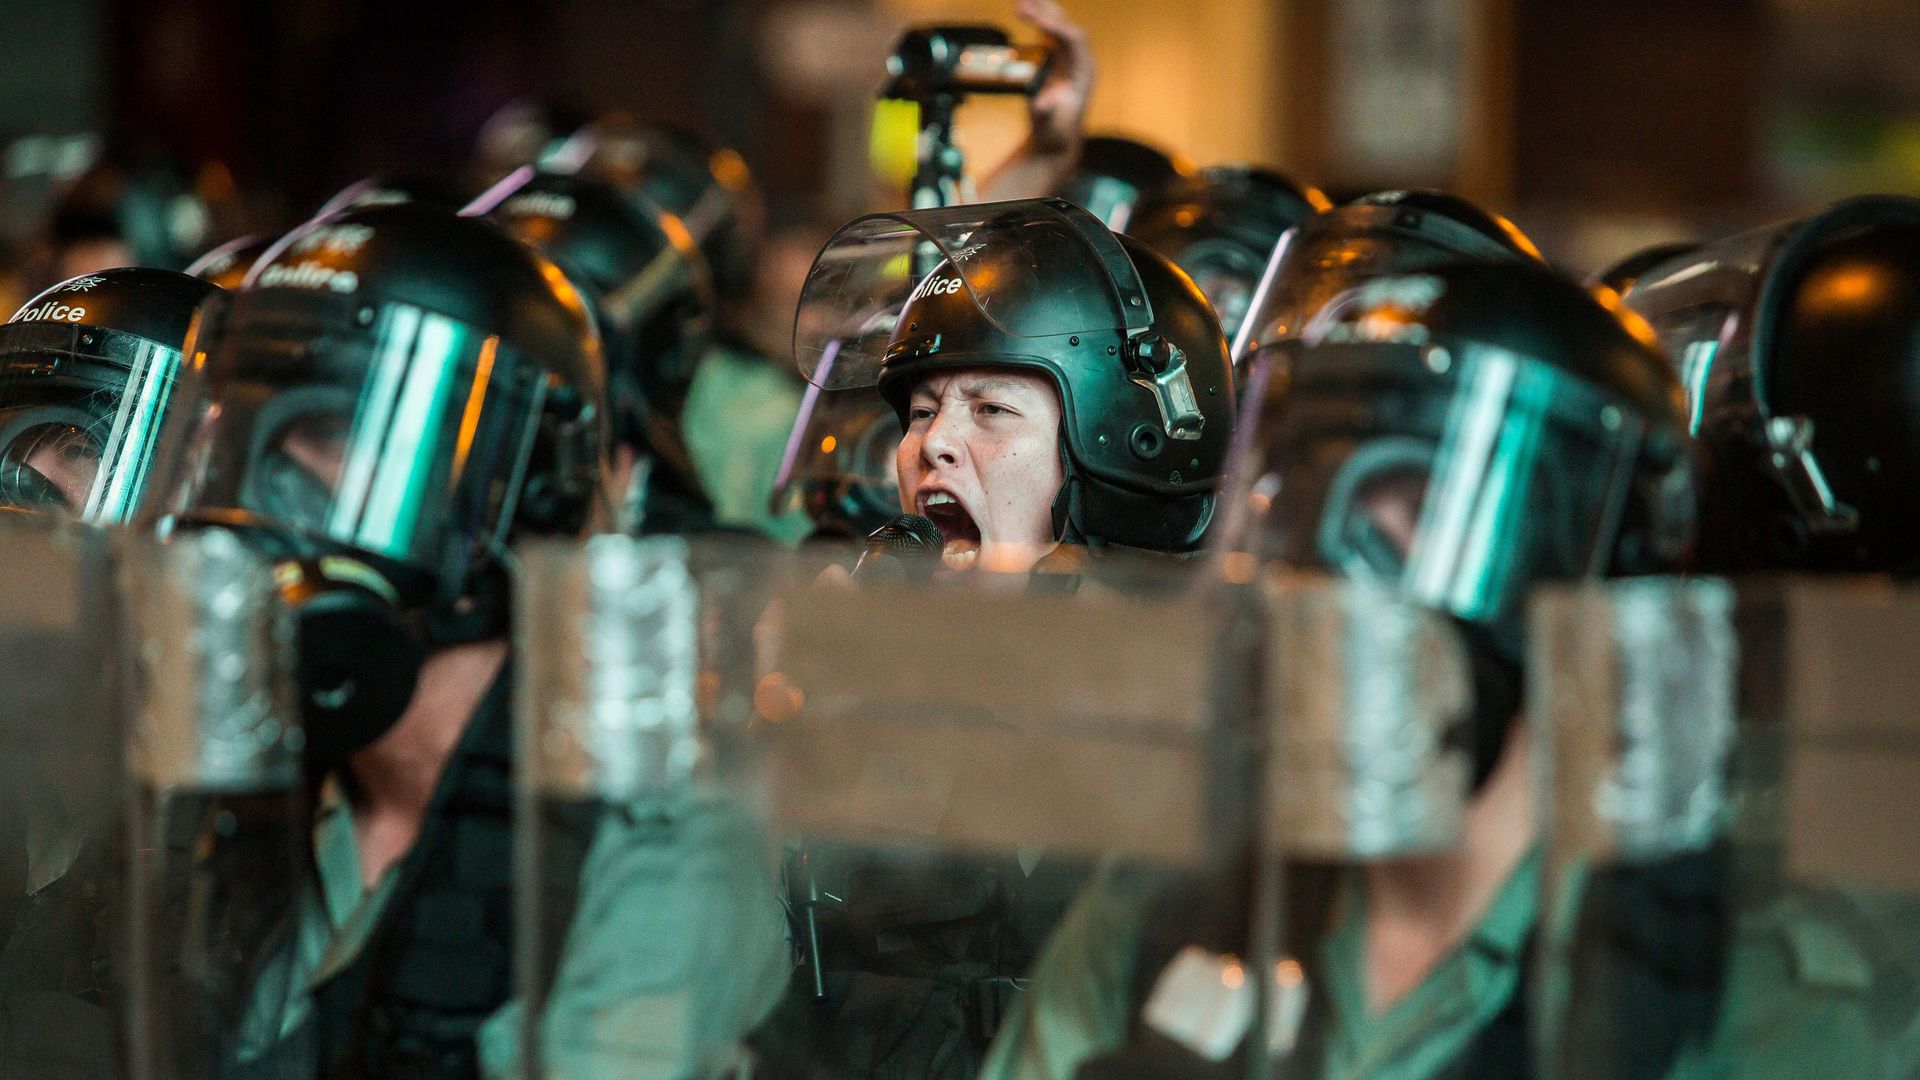 This image shows a riot officer yelling with his face exposed in a line of helmeted officers. 